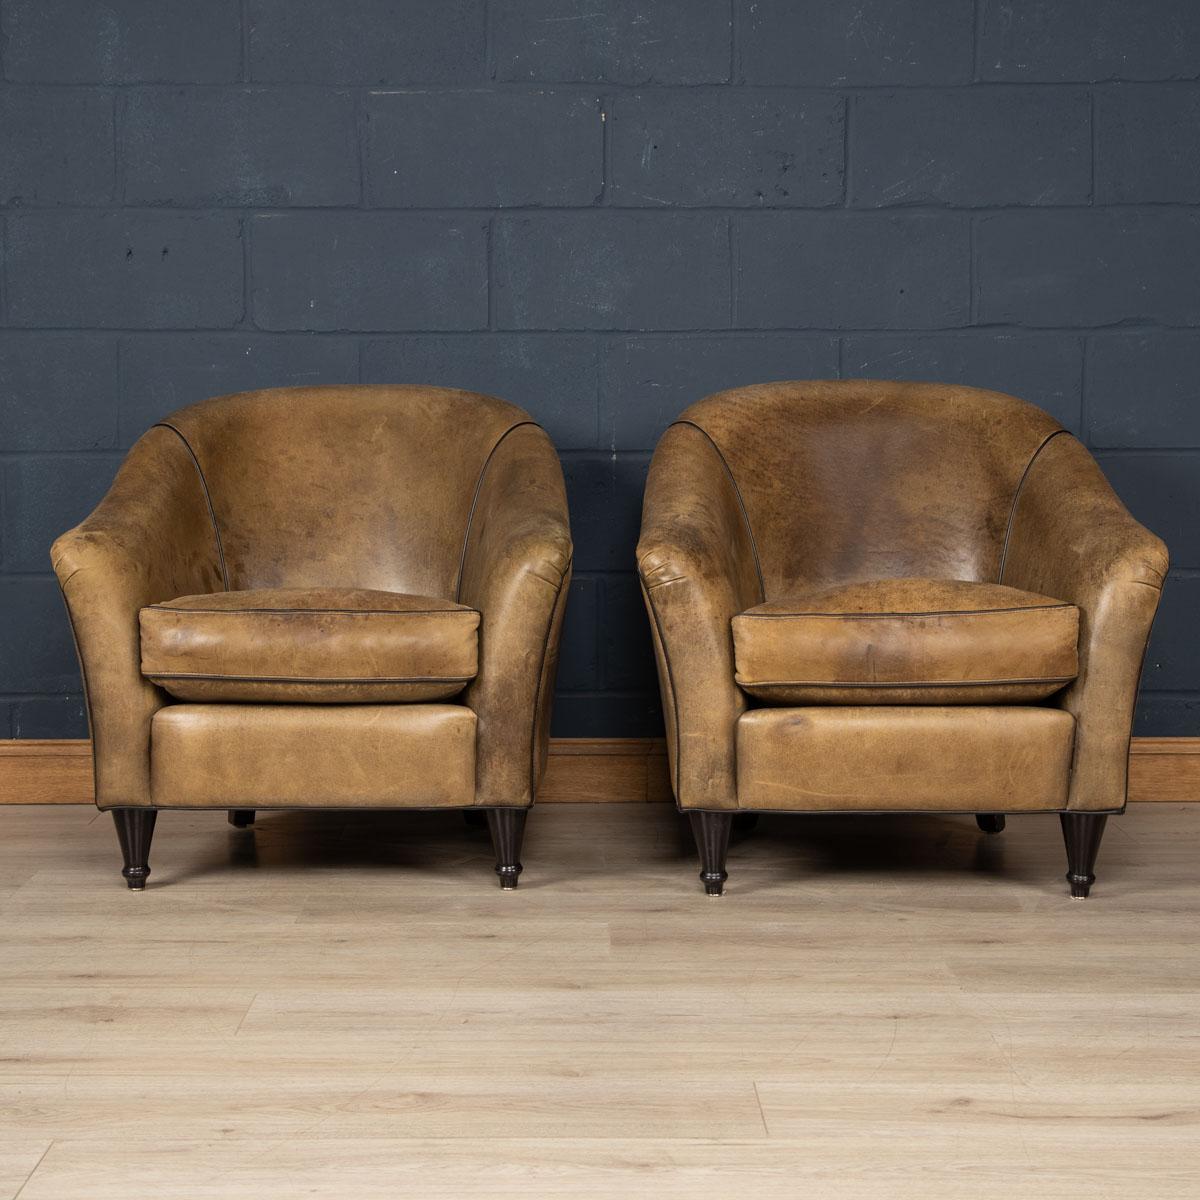 Showing superb patina and colour, this wonderful pair of club chairs were hand upholstered sheepskin leather in Holland by the finest craftsmen in the latter part of the 20th century.

CONDITION
In good condition - Some wear consistent with normal